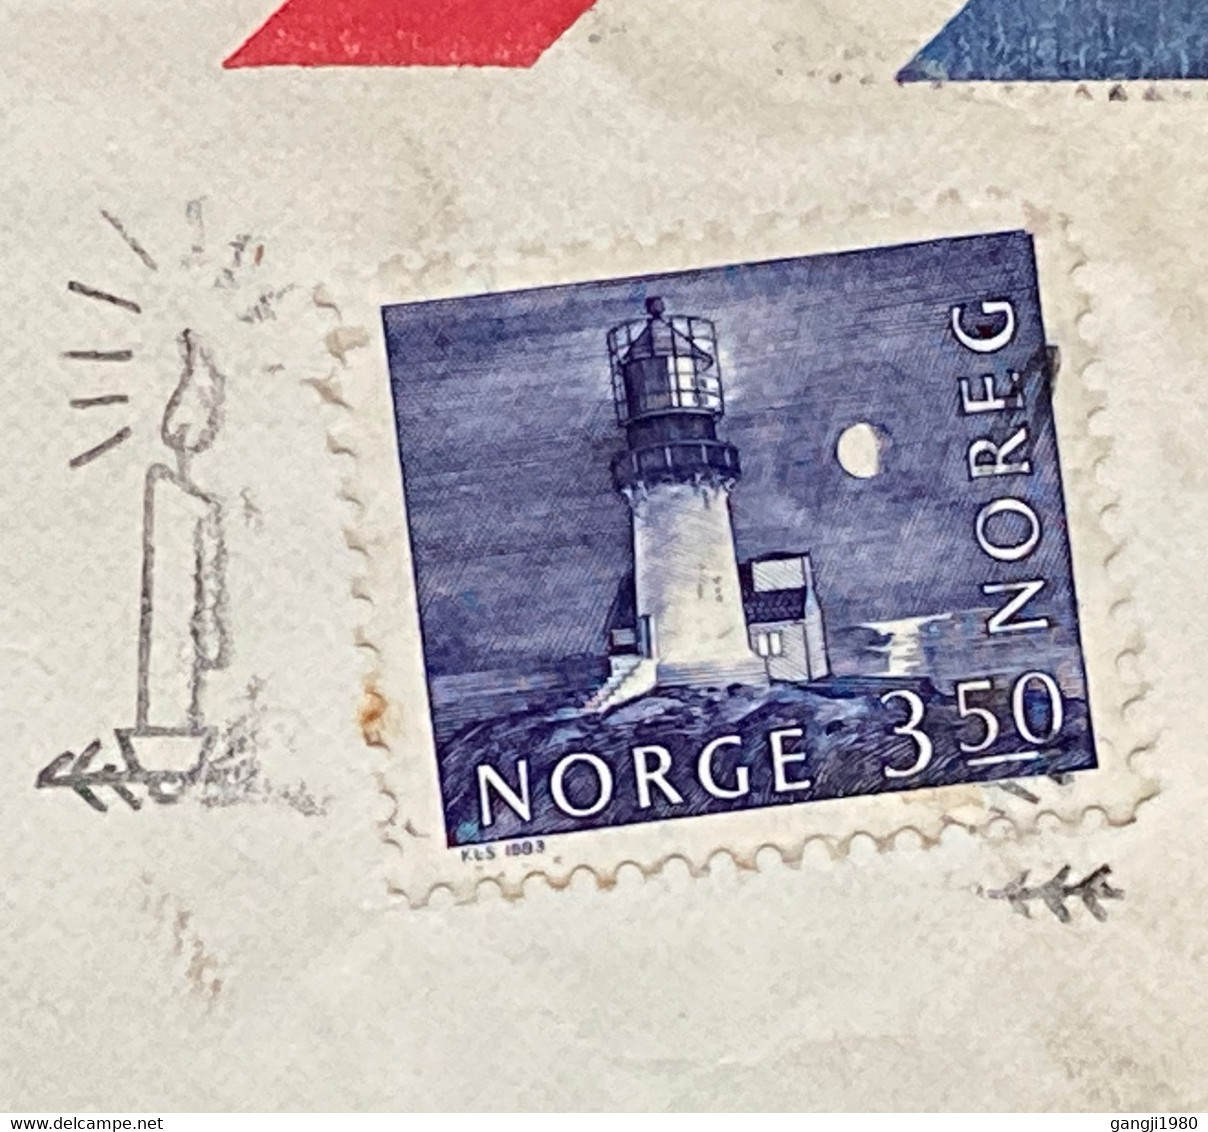 NORWAY,1984, AIR MAIL COVER TO INDIA, BERGEN CITY, CANDLE PICTURE, ROLLAR WAVY CANCELLATION, LIGHT HOUSE STAMP. - Covers & Documents